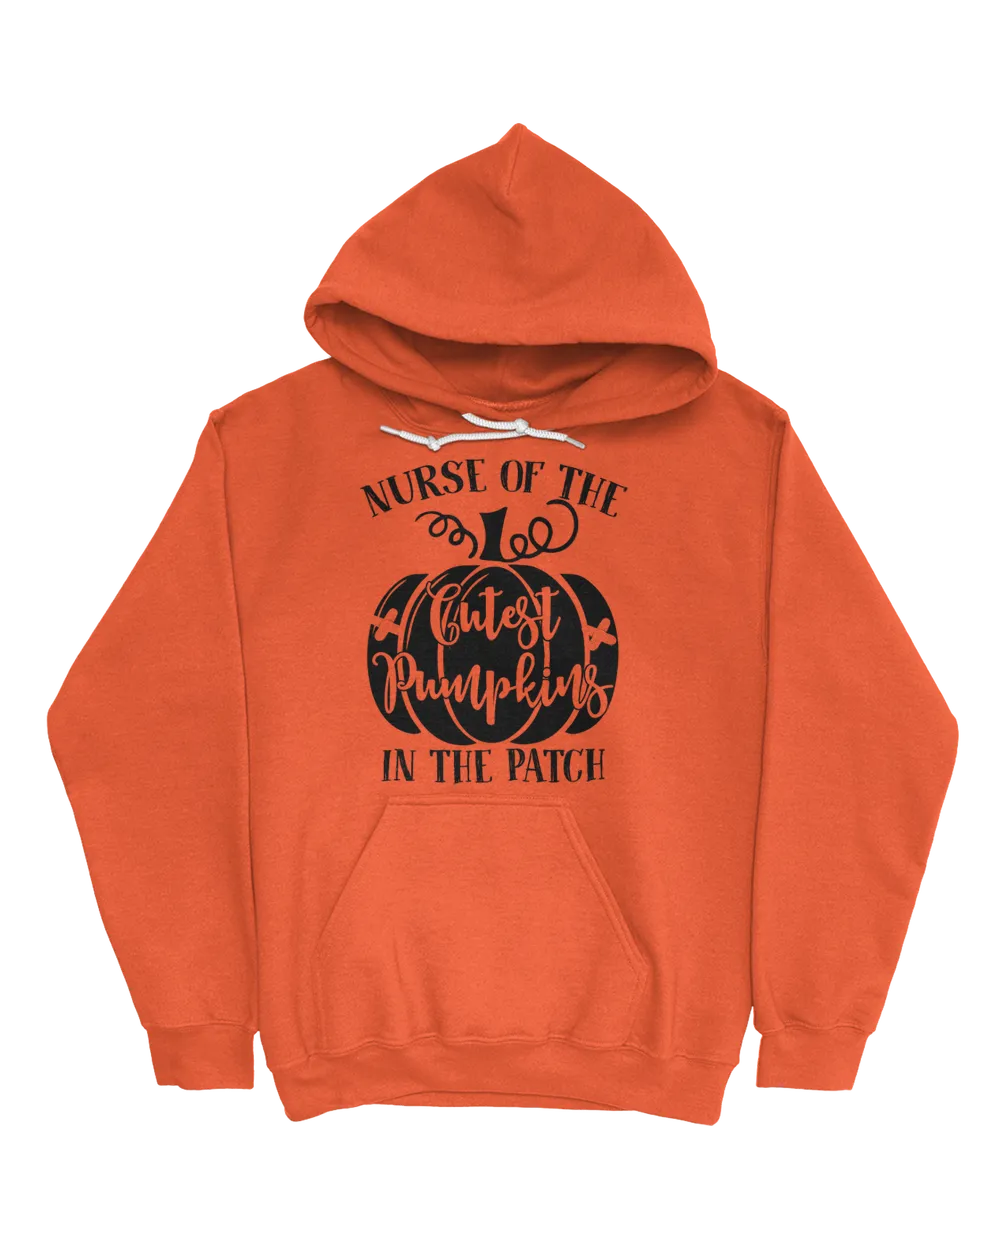 Nurse Of The Cutest Pumpkins In The Patch Funny Halloween Sarcasm Shirt